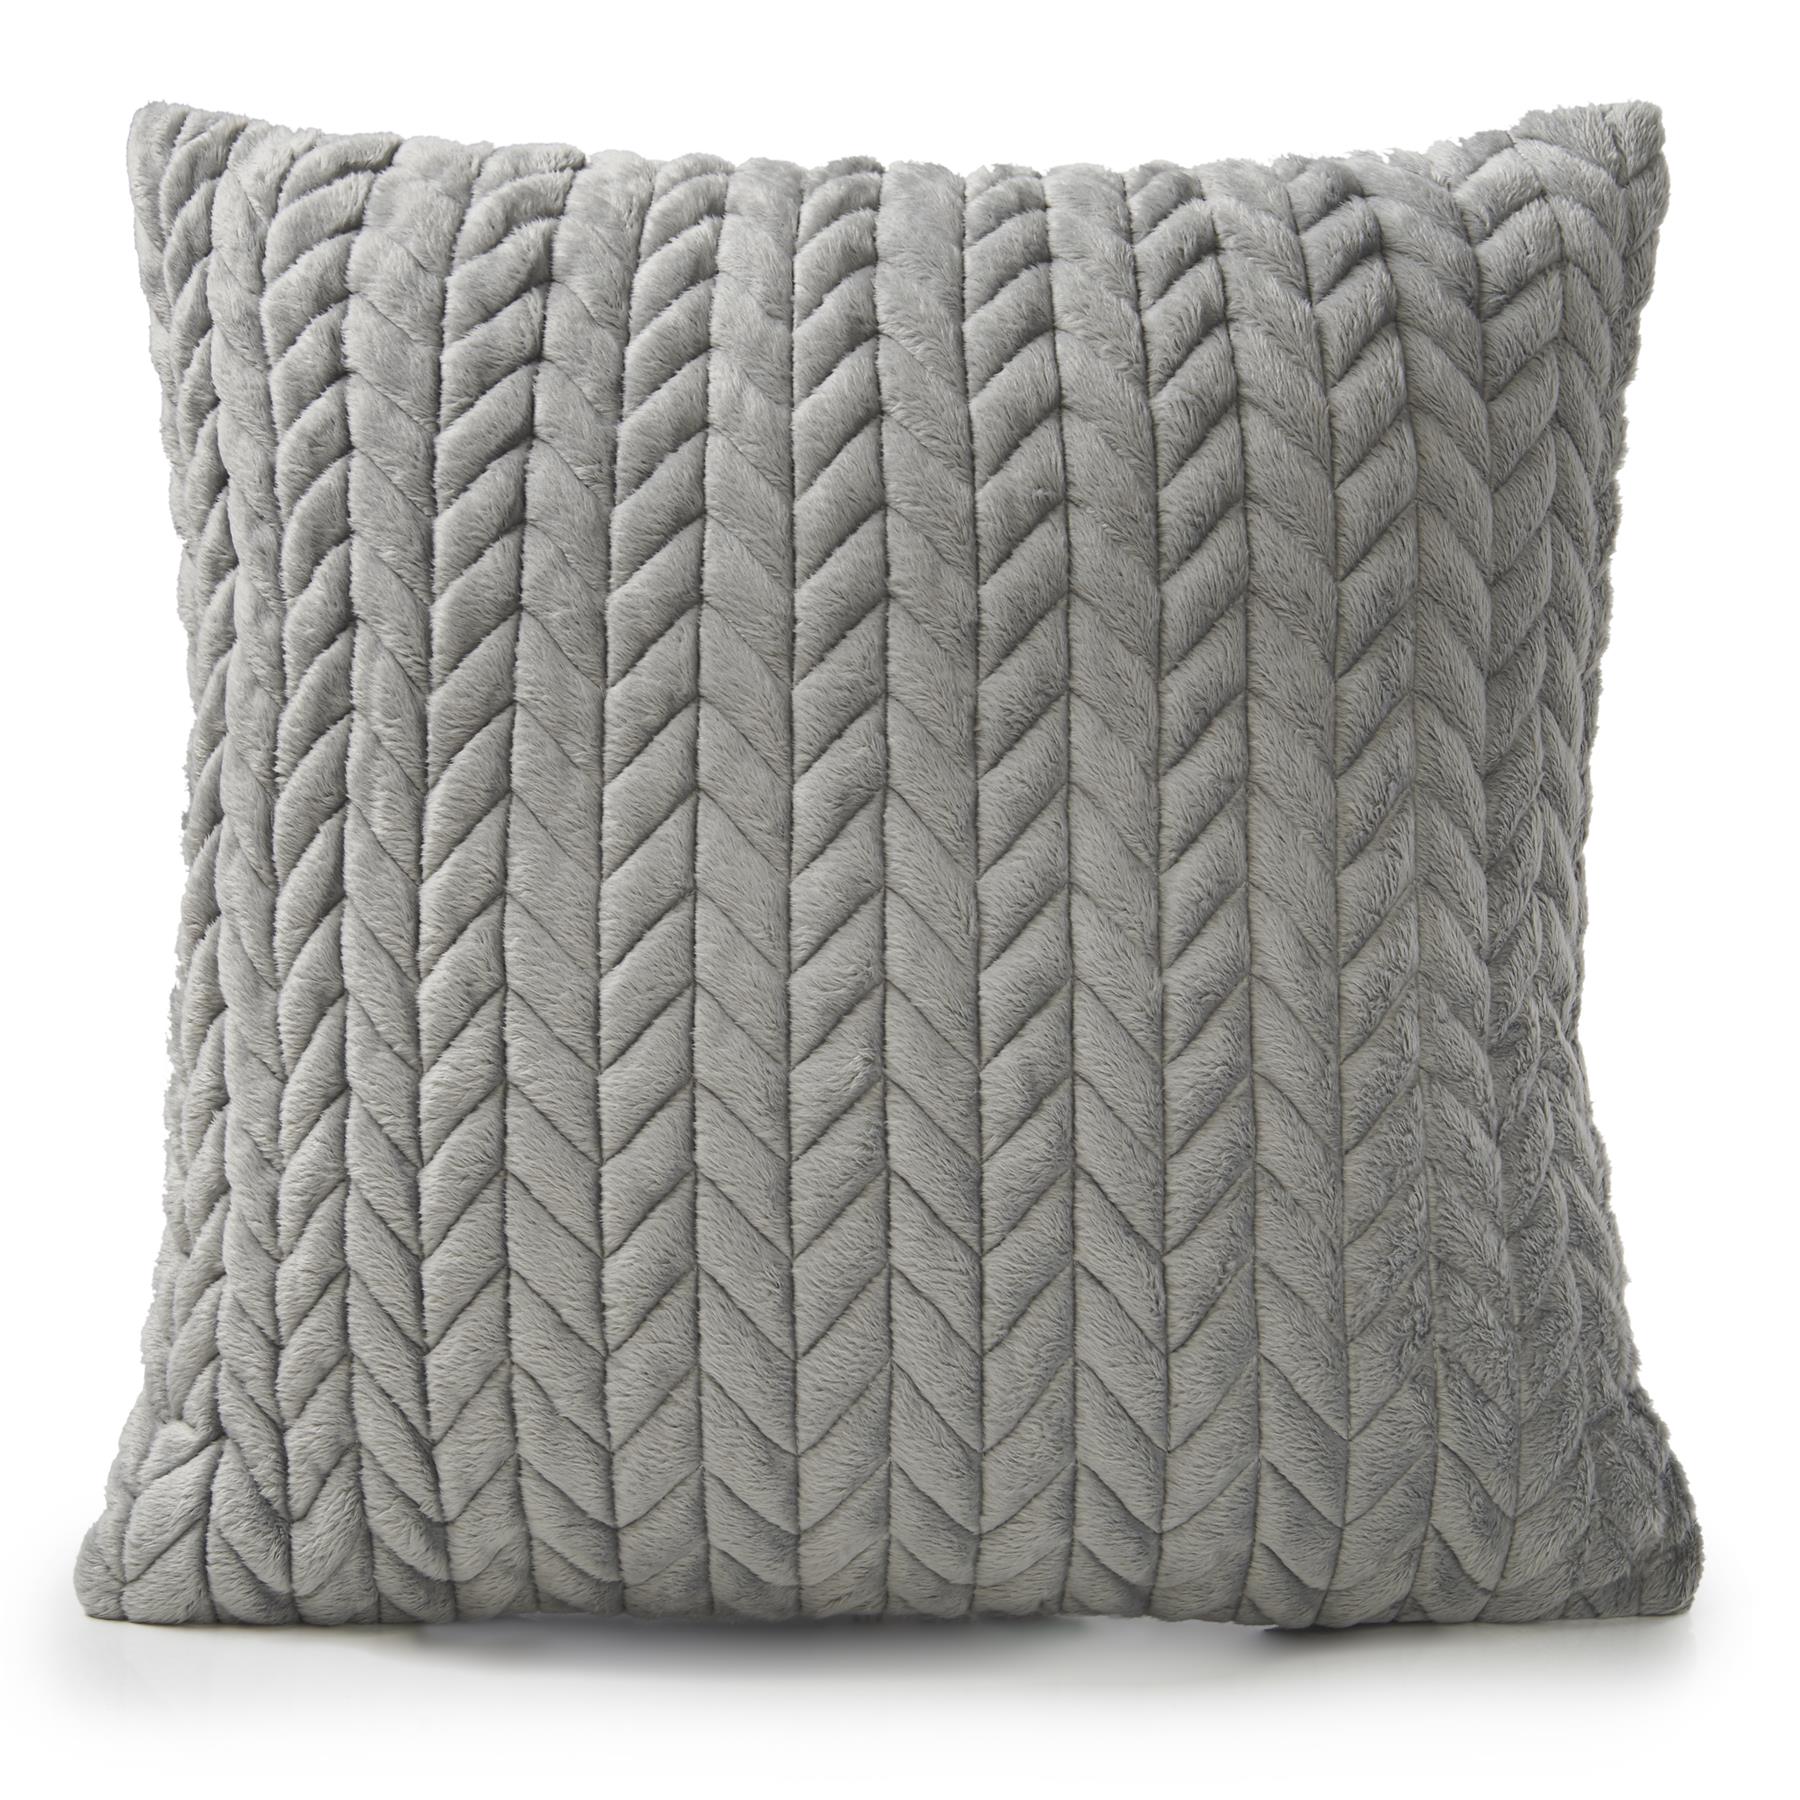 Grey Supersoft Knitted Velvet Cushion Covers